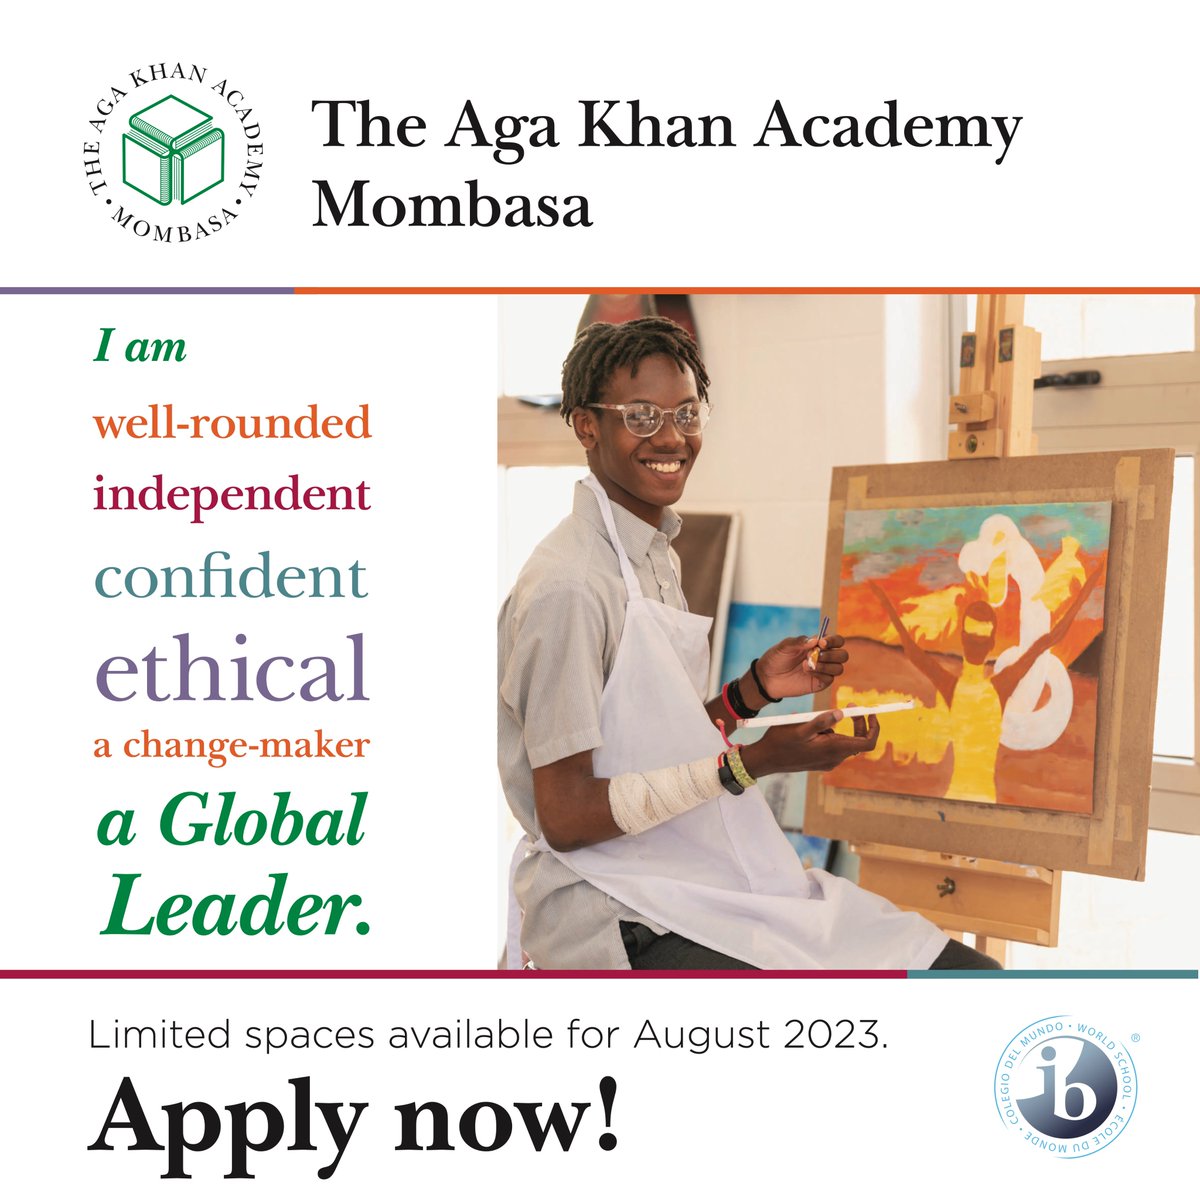 The Aga Khan Academy Mombasa is committed to excellence in education.

Fill in the form to apply; https://t.co/Yz9AcHKDjk

#IBeducation #Excellenceineducation #AgaKhanAcademies #AKDN #AgaKhanSchools #AgaKhanAcademyMombasa #IBtogether https://t.co/lx4RG3zBlS